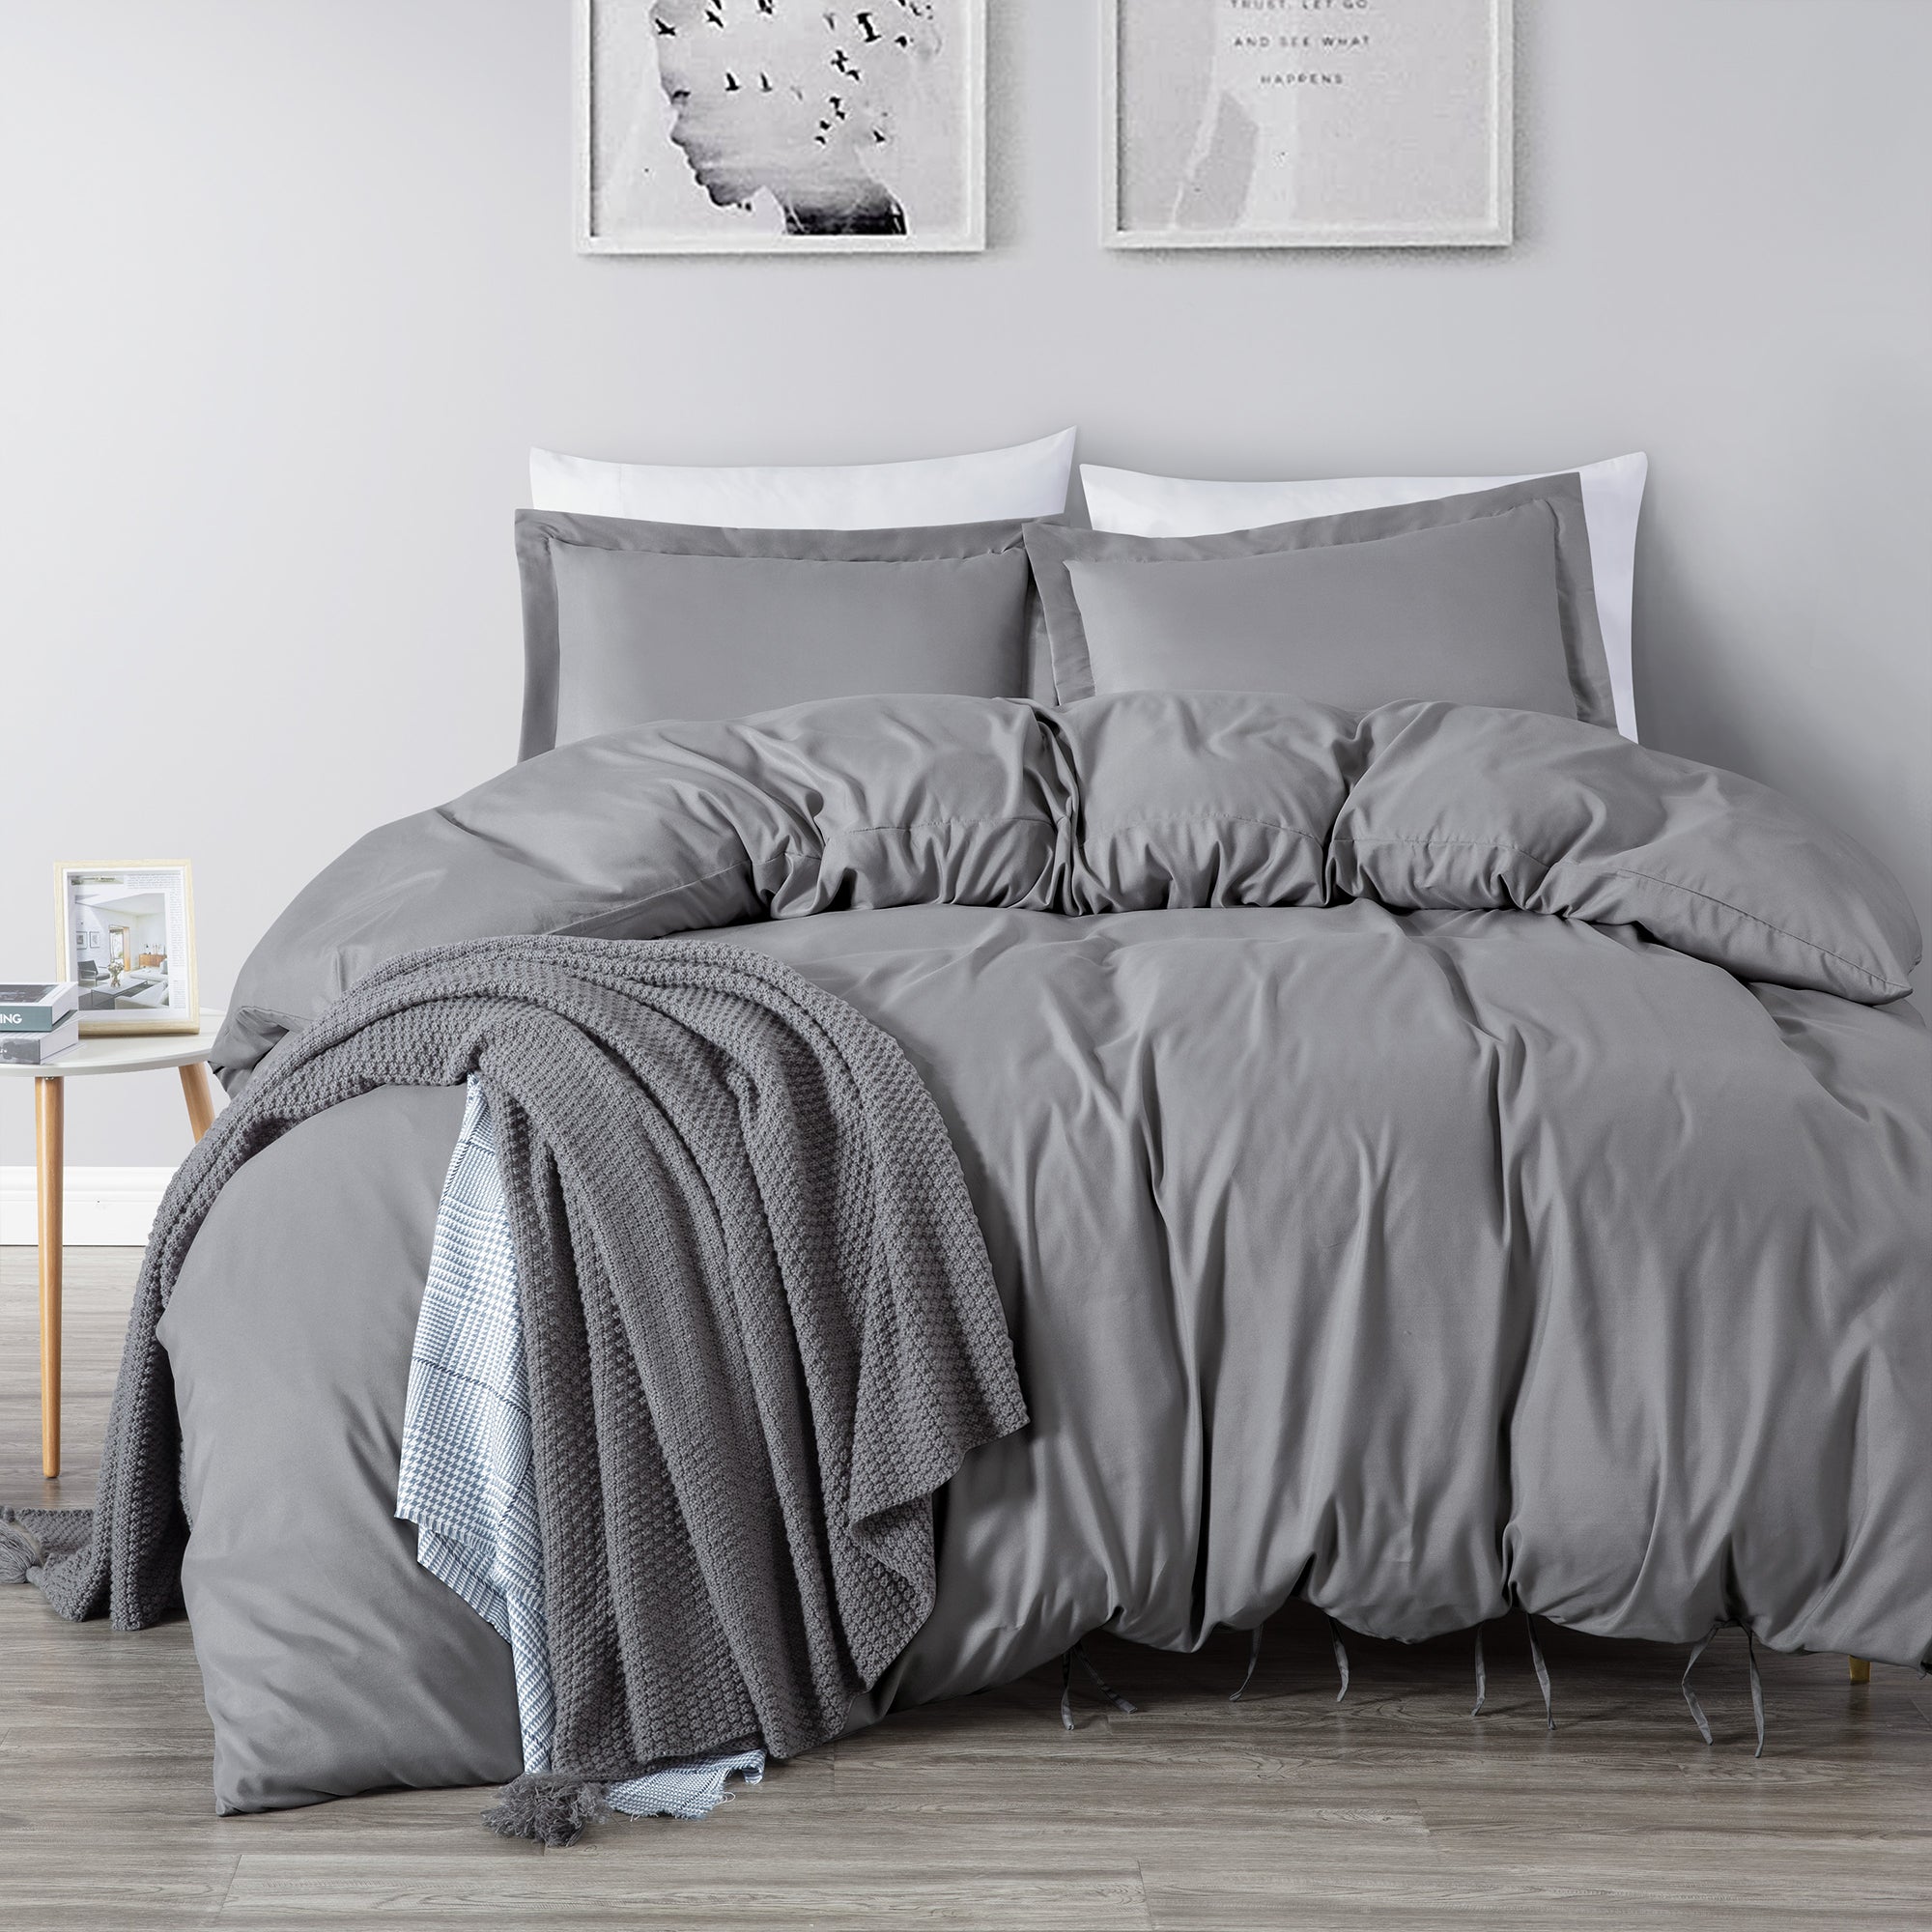 Kingsley Trend Duvet Cover Set - Pre-Washed Ultra Soft & Breathable 3-Piece Microfiber Set with Bowtie Knot Closure, Machine Washable for Easy Care, kingsleytrend, , kingsley-trend-duvet-cover-set-pre-washed-ultra-soft-breathable-3-piece-microfiber-set-with-bowtie-knot-closure-machine-washable-for-easy-care, Duvet Cover, MCF, kingsleytrend